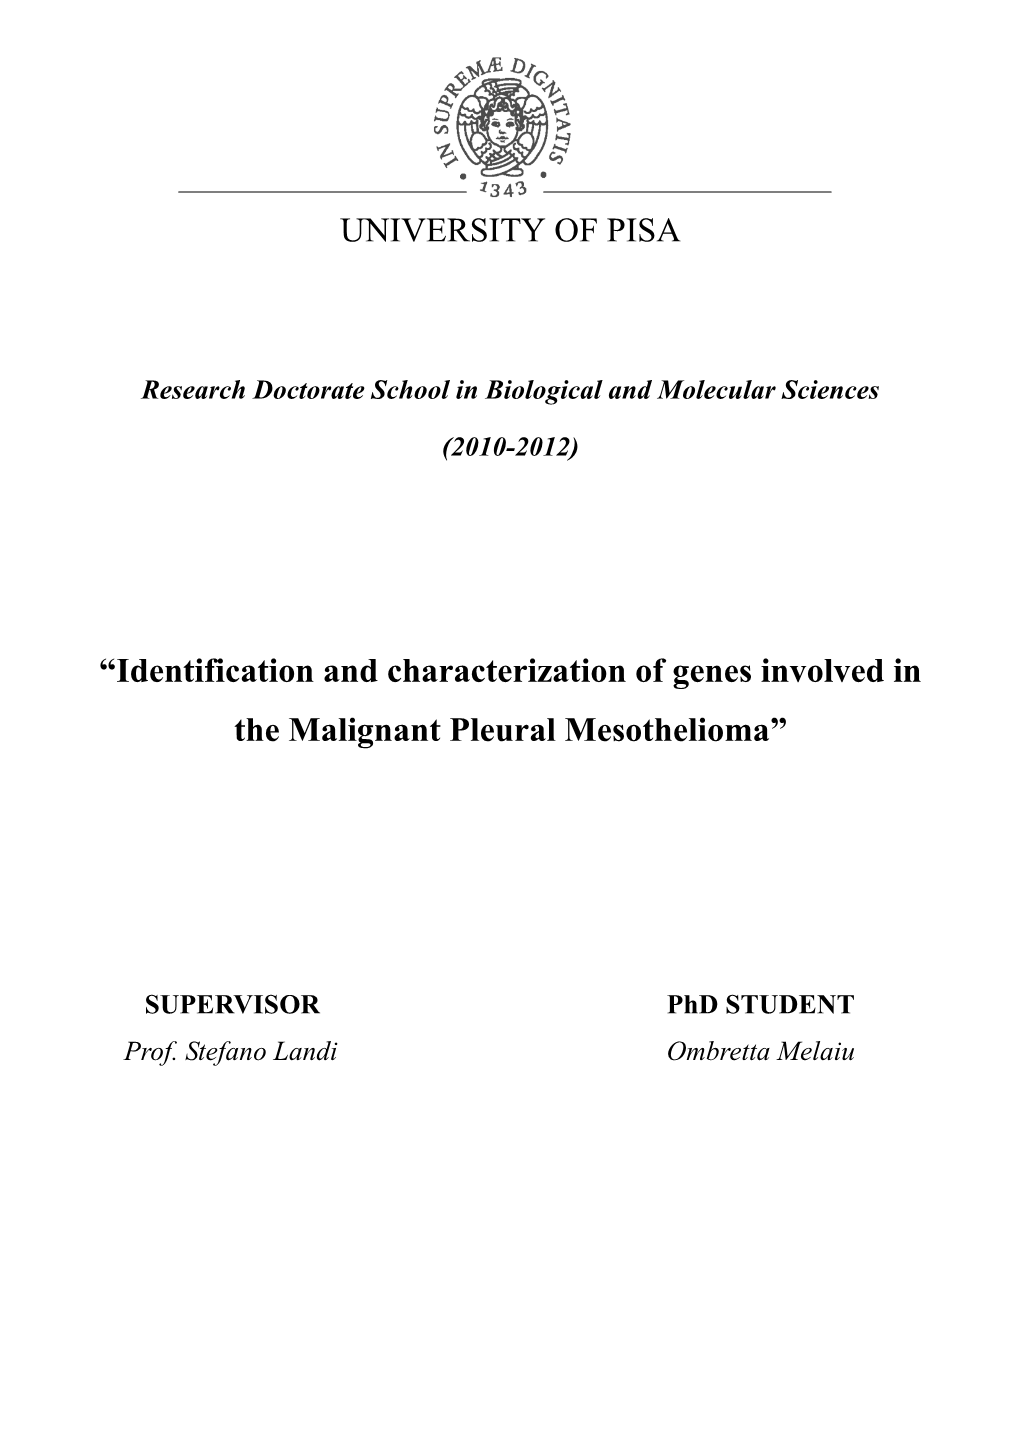 UNIVERSITY of PISA “Identification and Characterization of Genes Involved in the Malignant Pleural Mesothelioma”